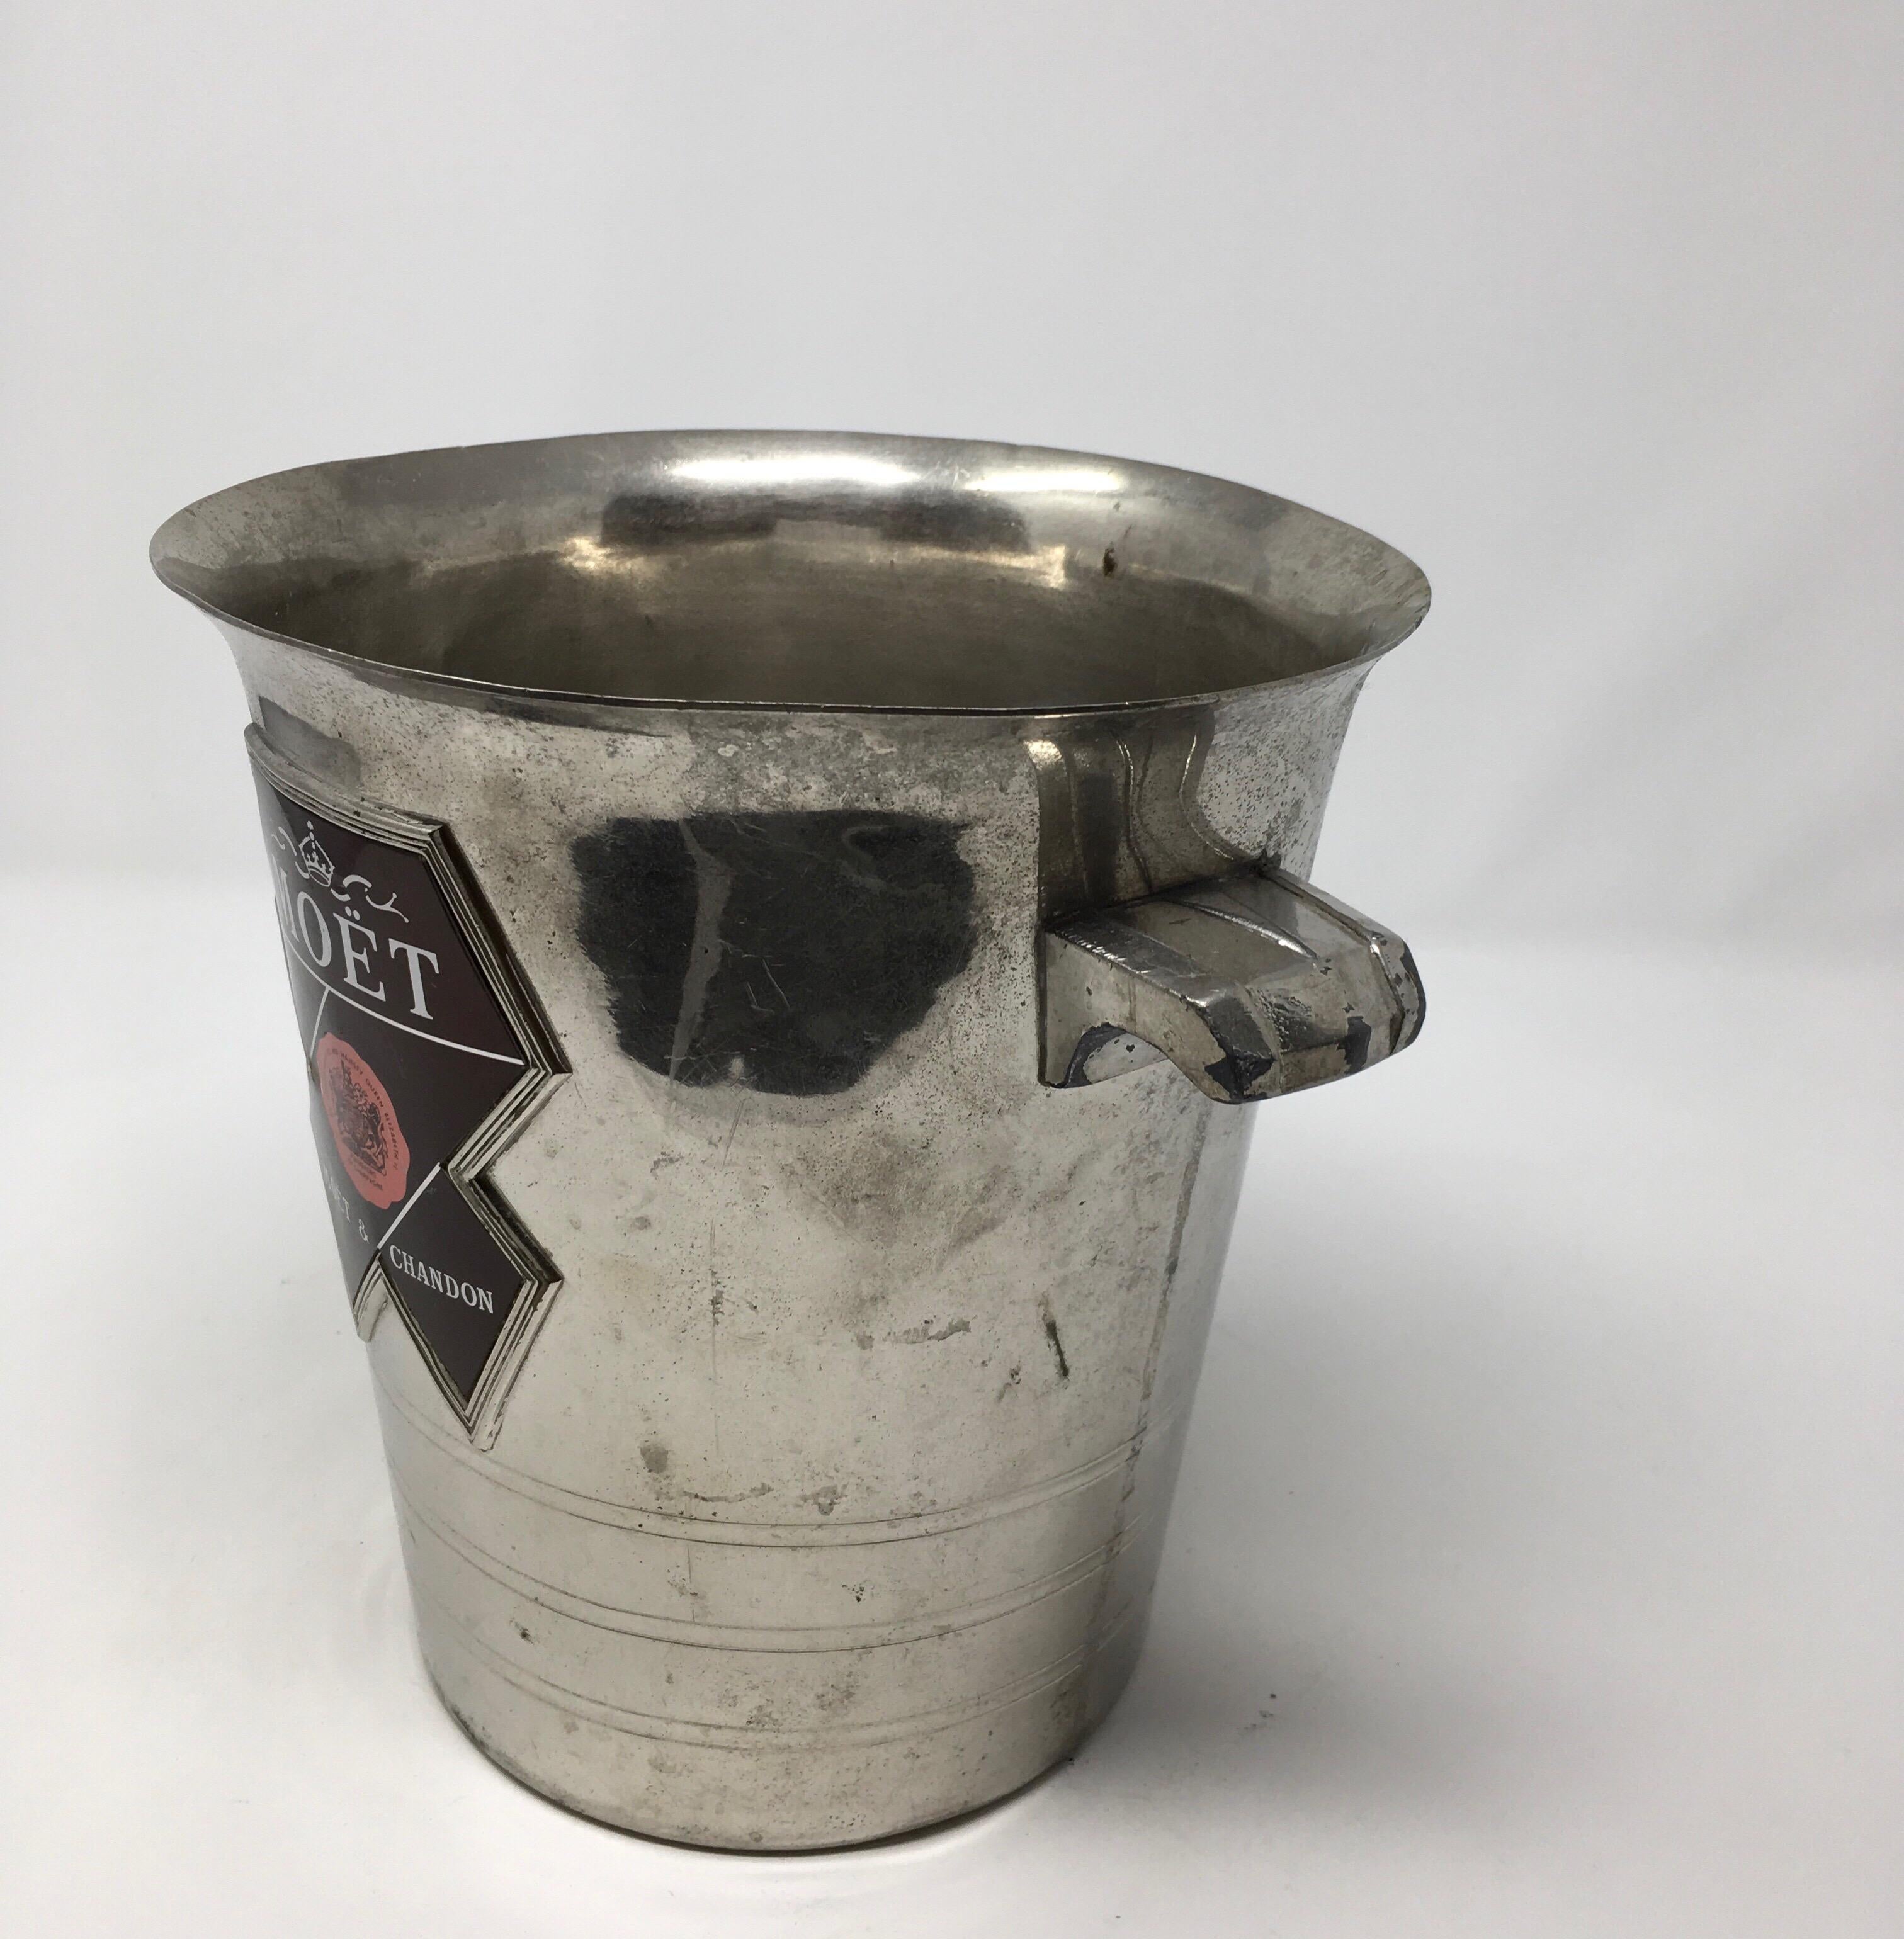 Vintage Moet & Chandon Champagne or wine cooler with silver finish and two handles. It has a nicely worn finish and would be perfect for a bar, wine room or kitchen.